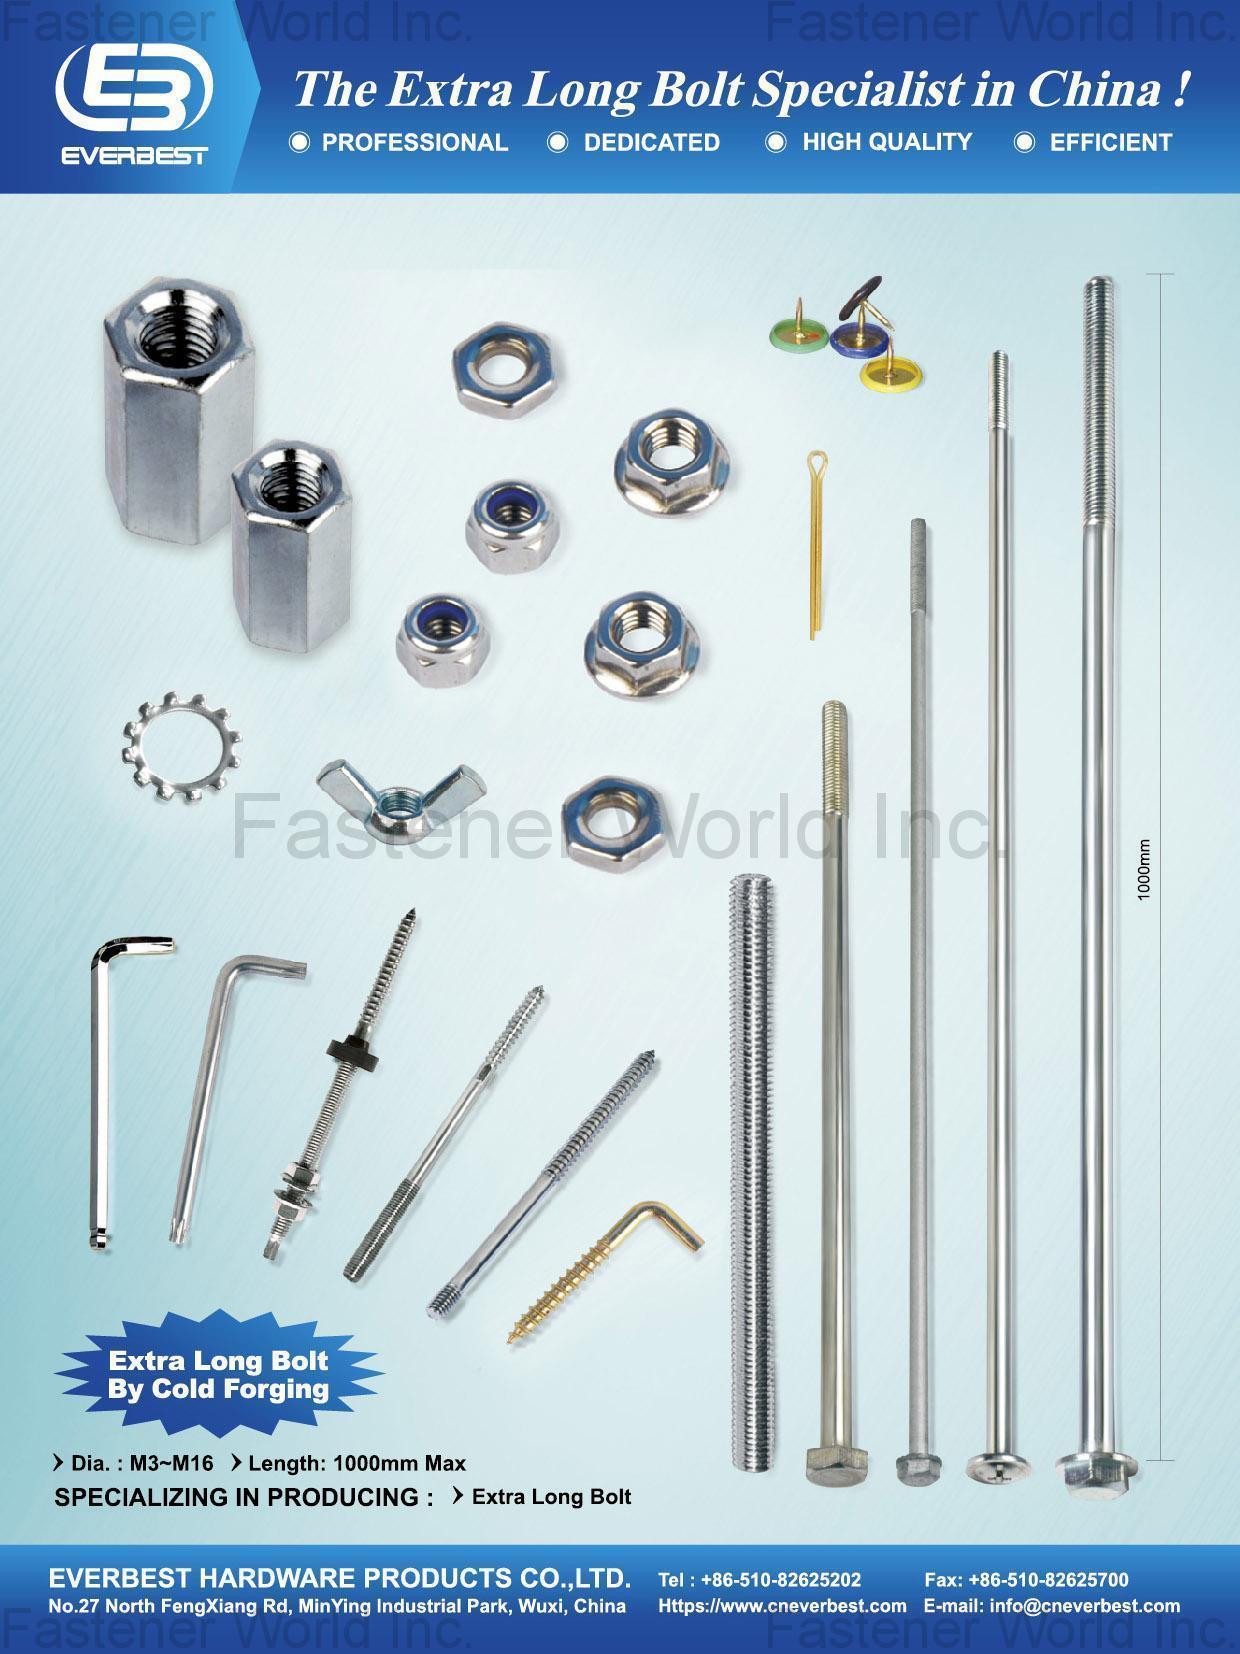 EVERBEST HARDWARE PRODUCTS CO., LTD.  , Extra Long Bolt by Cold Forging